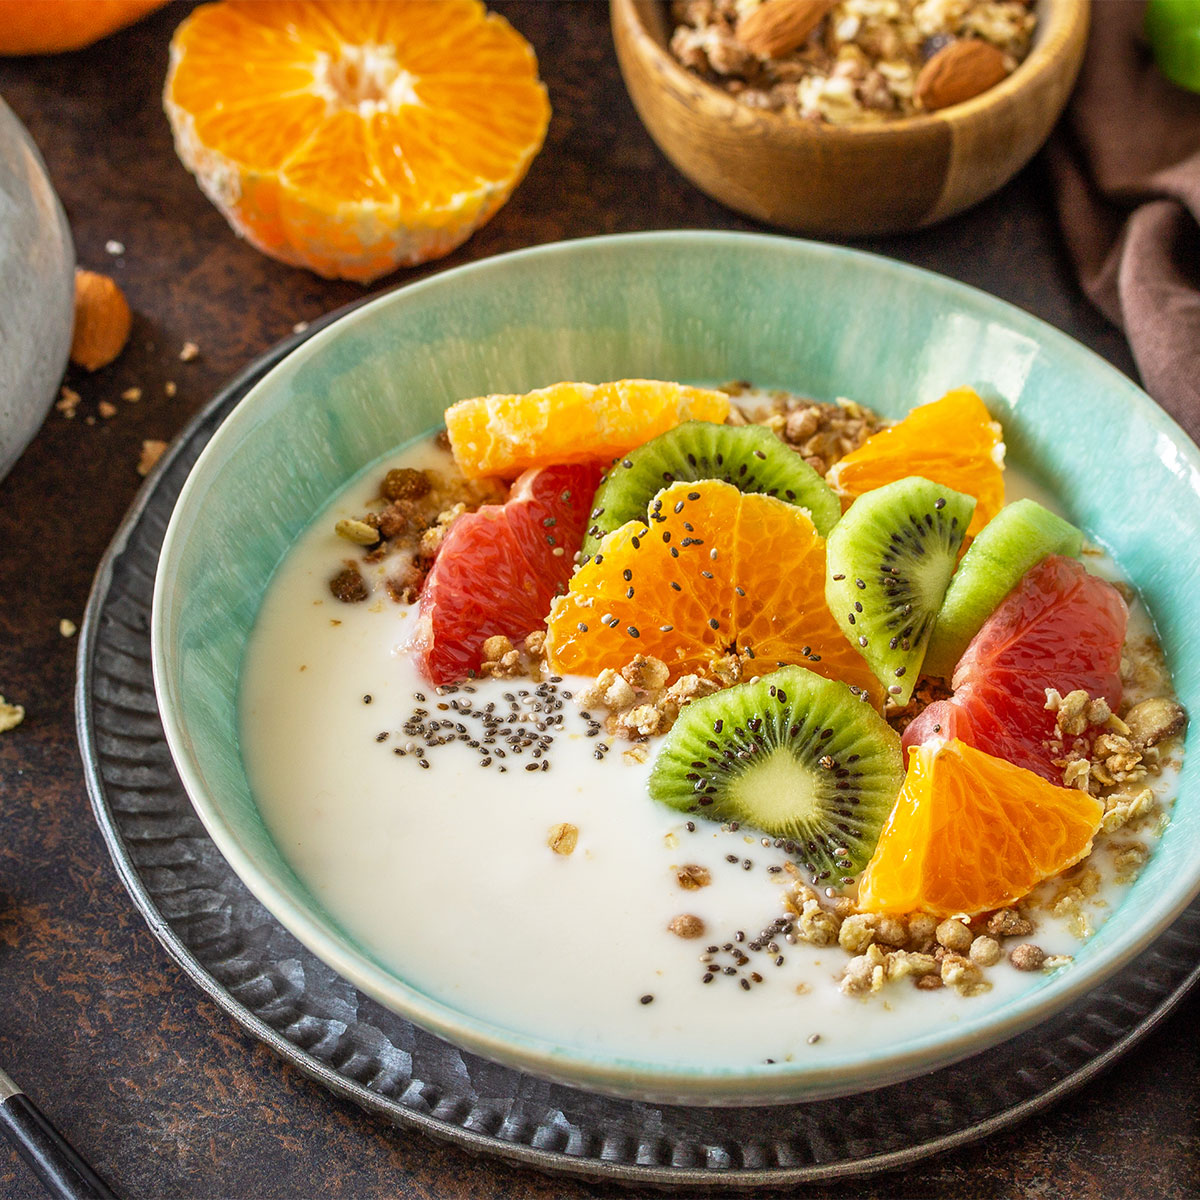 yogurt topped with fruit and chia seeds